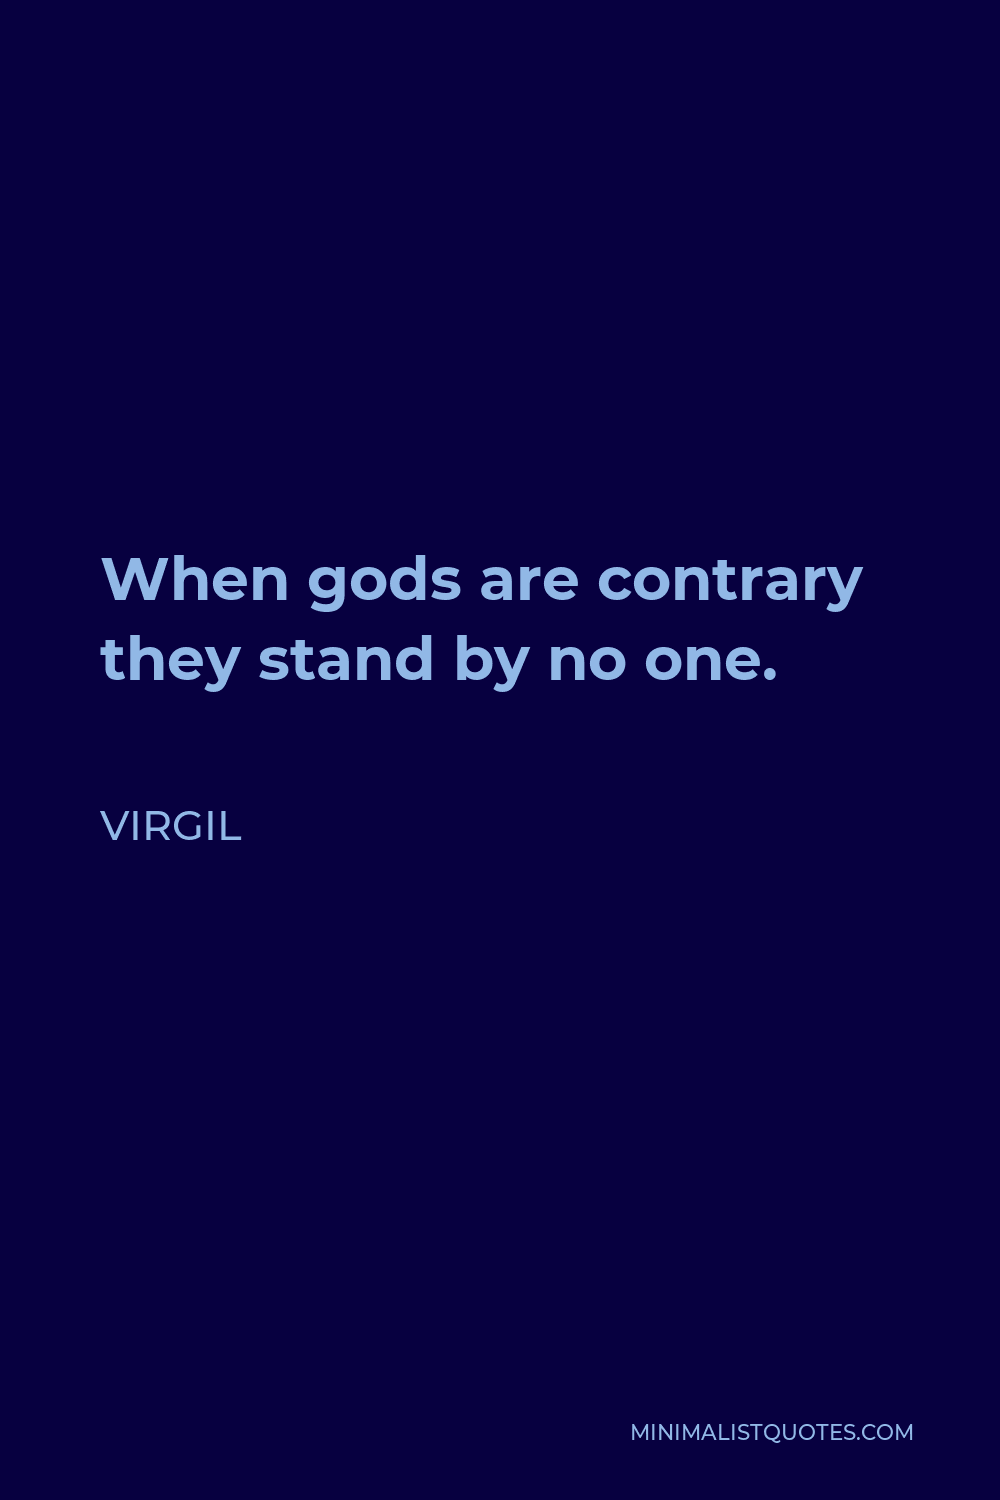 Virgil Quote - When gods are contrary they stand by no one.